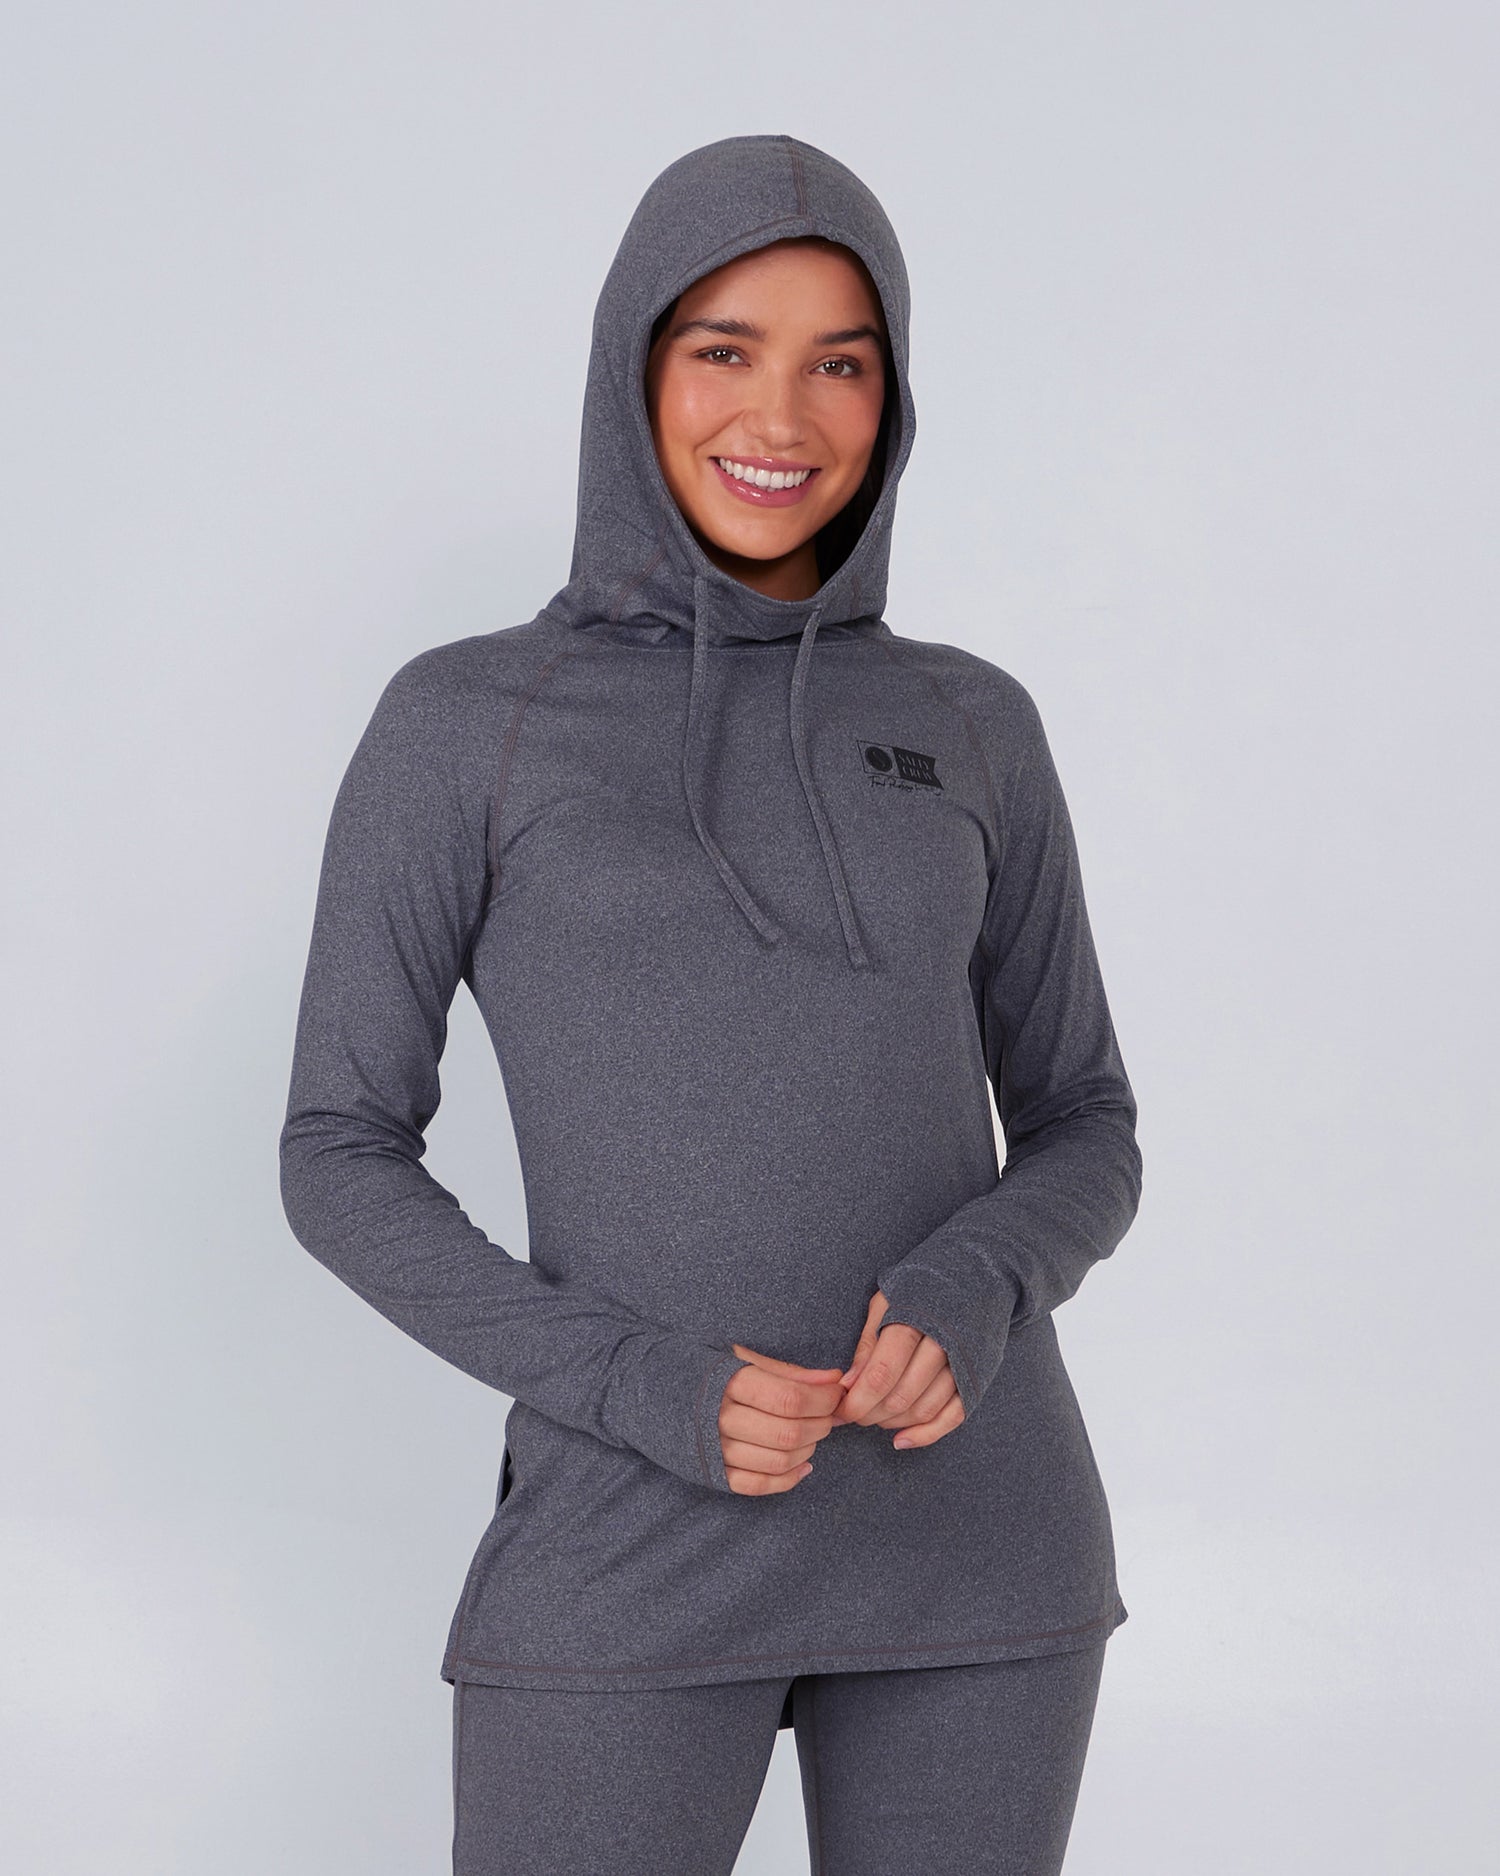 Thrill Seekers Charcoal Hooded Sunshirt